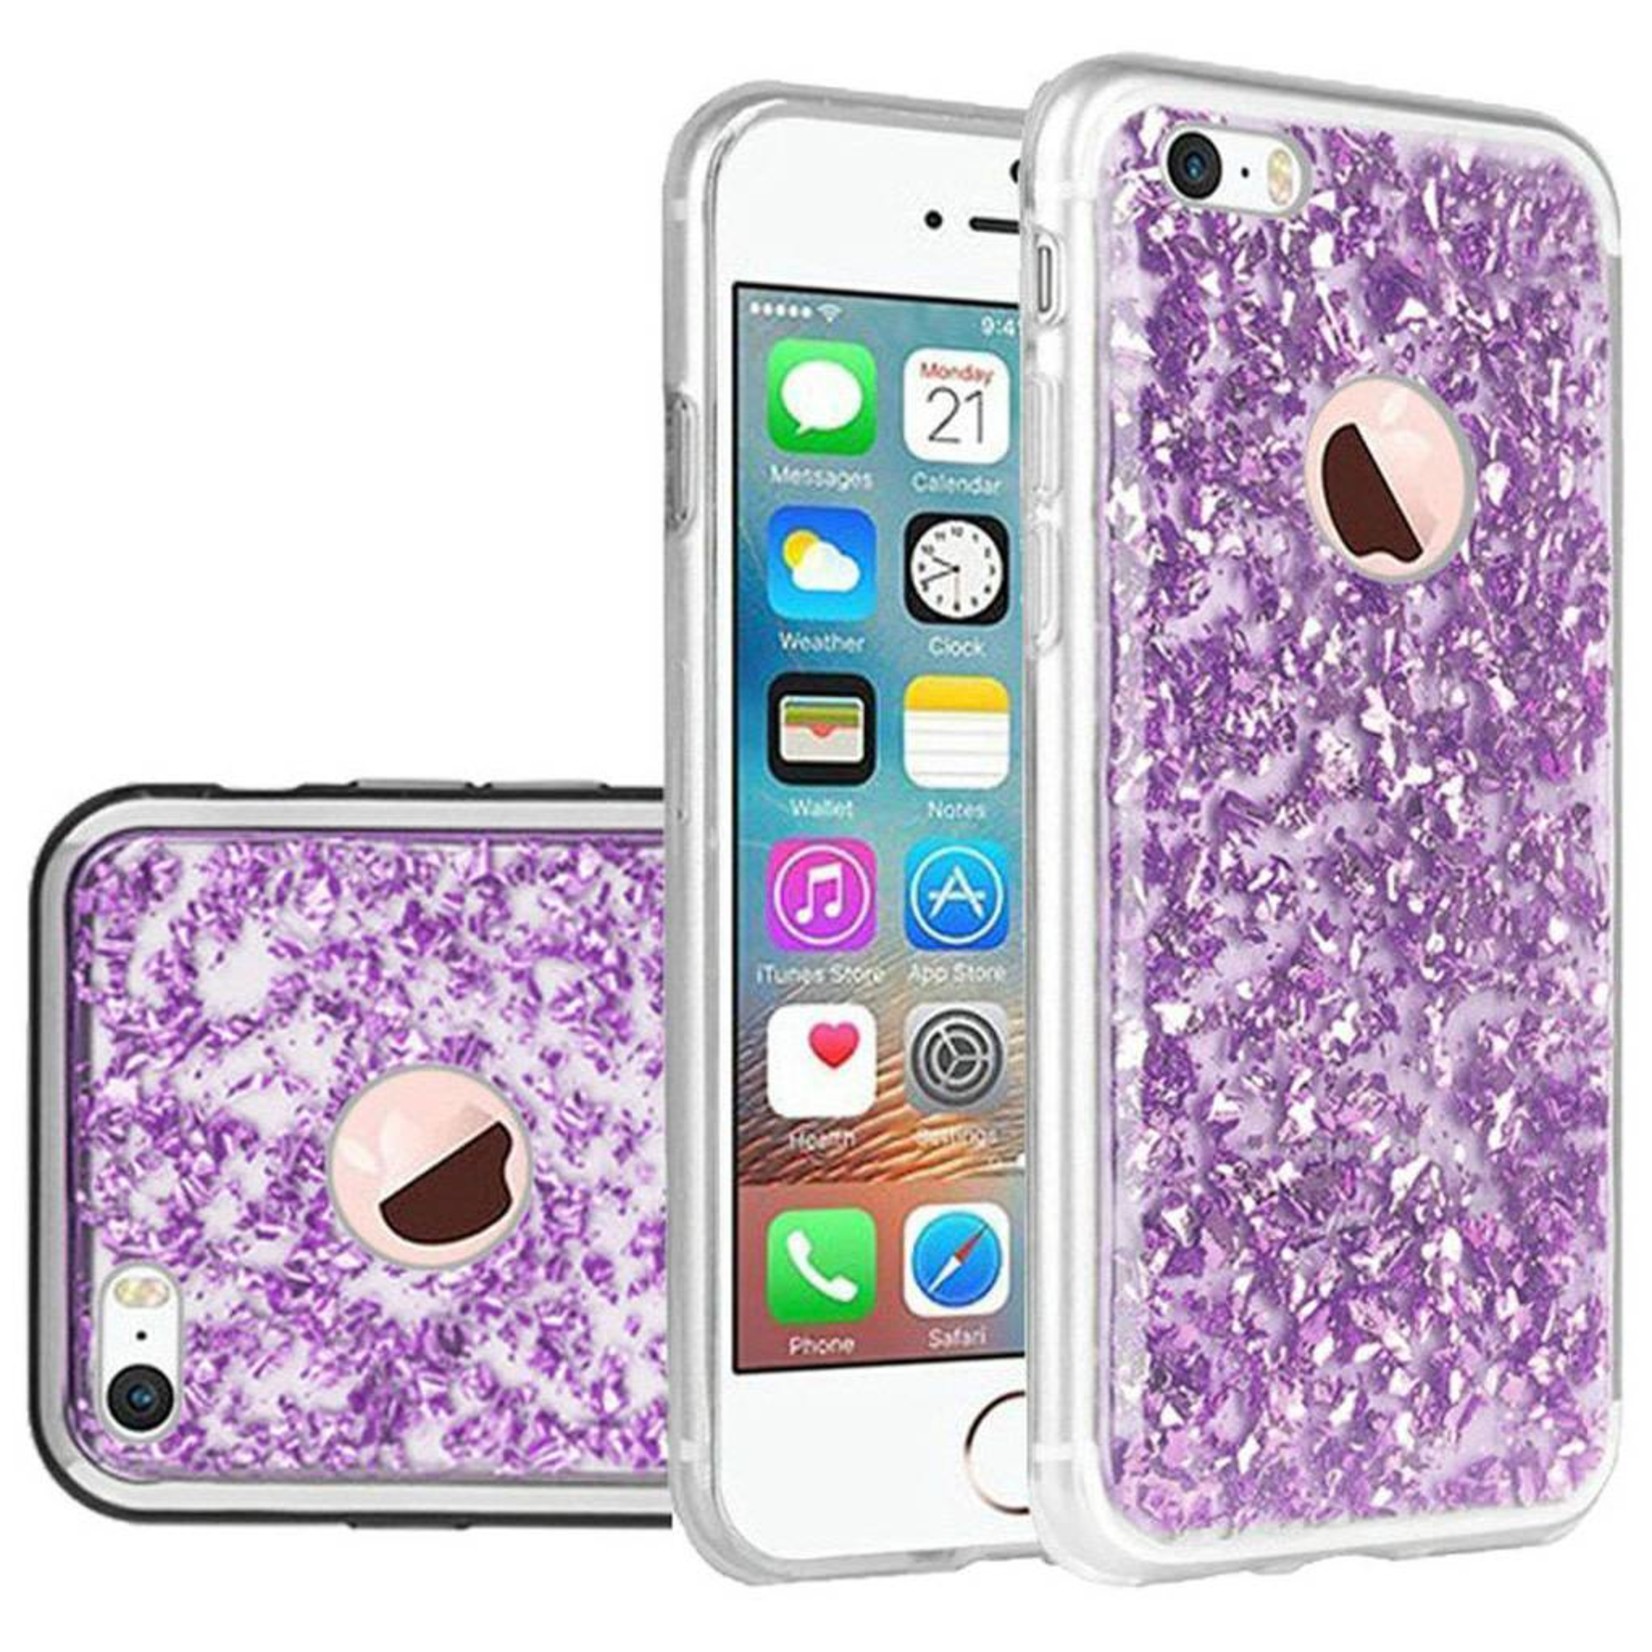 Frozen Glitter Case with Electroplated Chrome Bumper Edges for iPhone 5/5S/SE